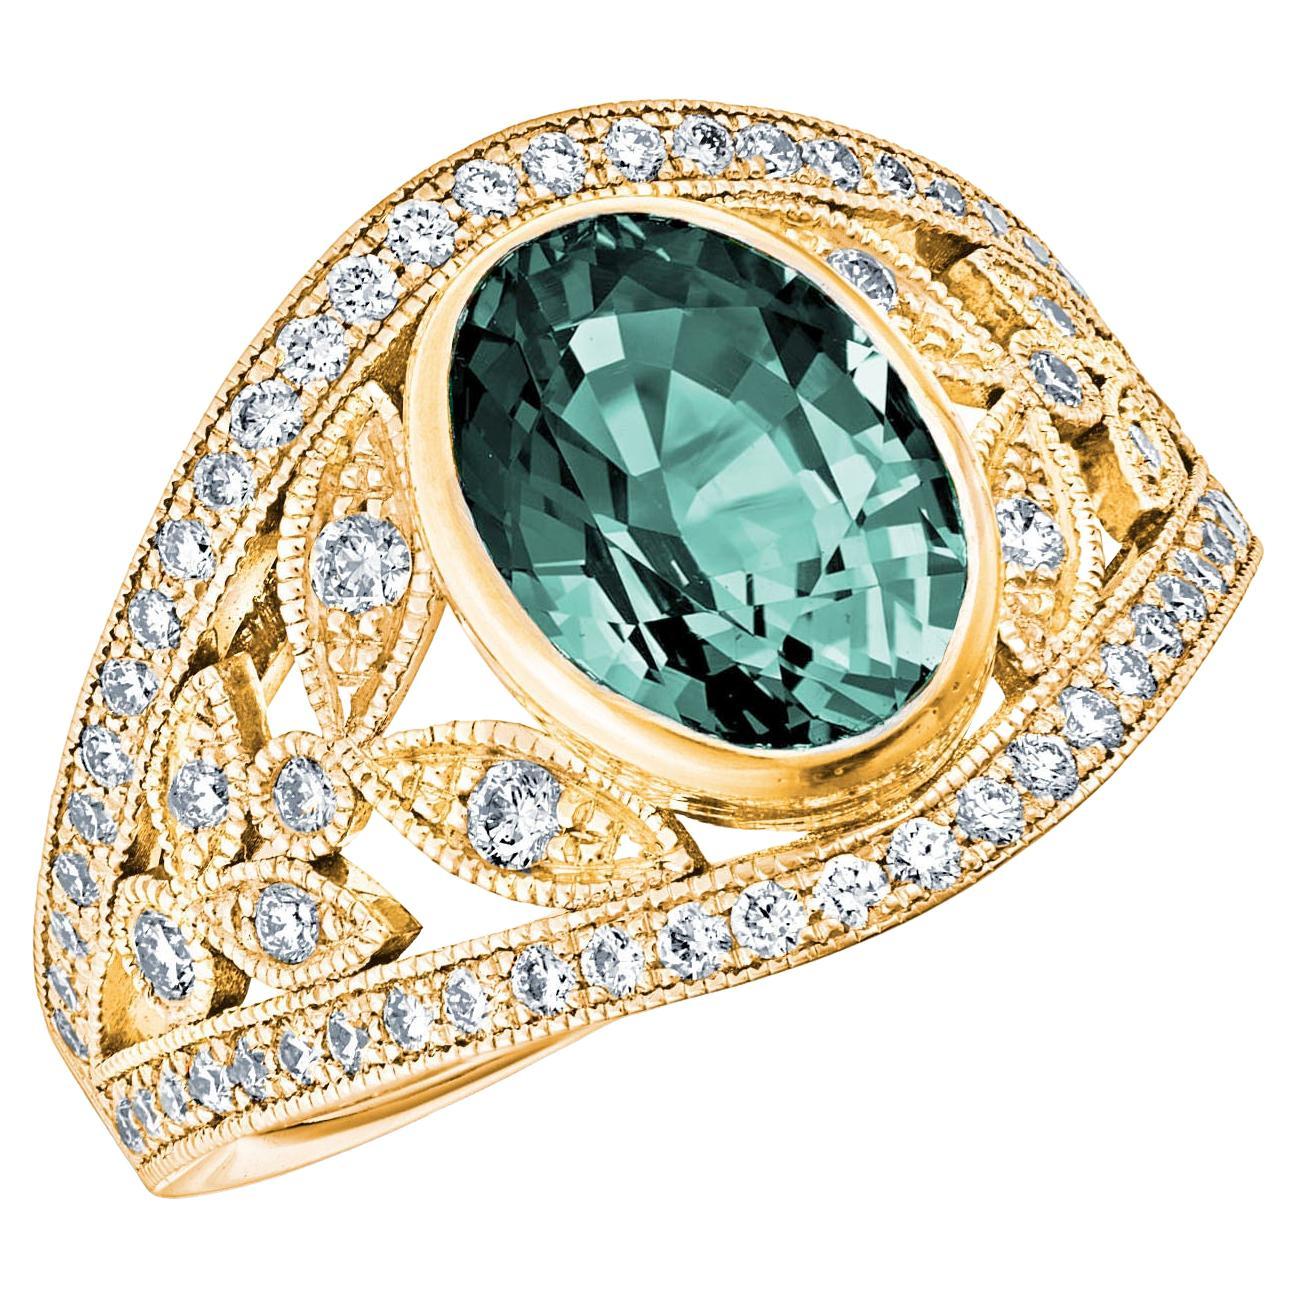 For Sale:  18k Yellow Gold Laurel Leaf Design 2.03 Ct Green Sapphire Ring 0.65 Cts Diamonds